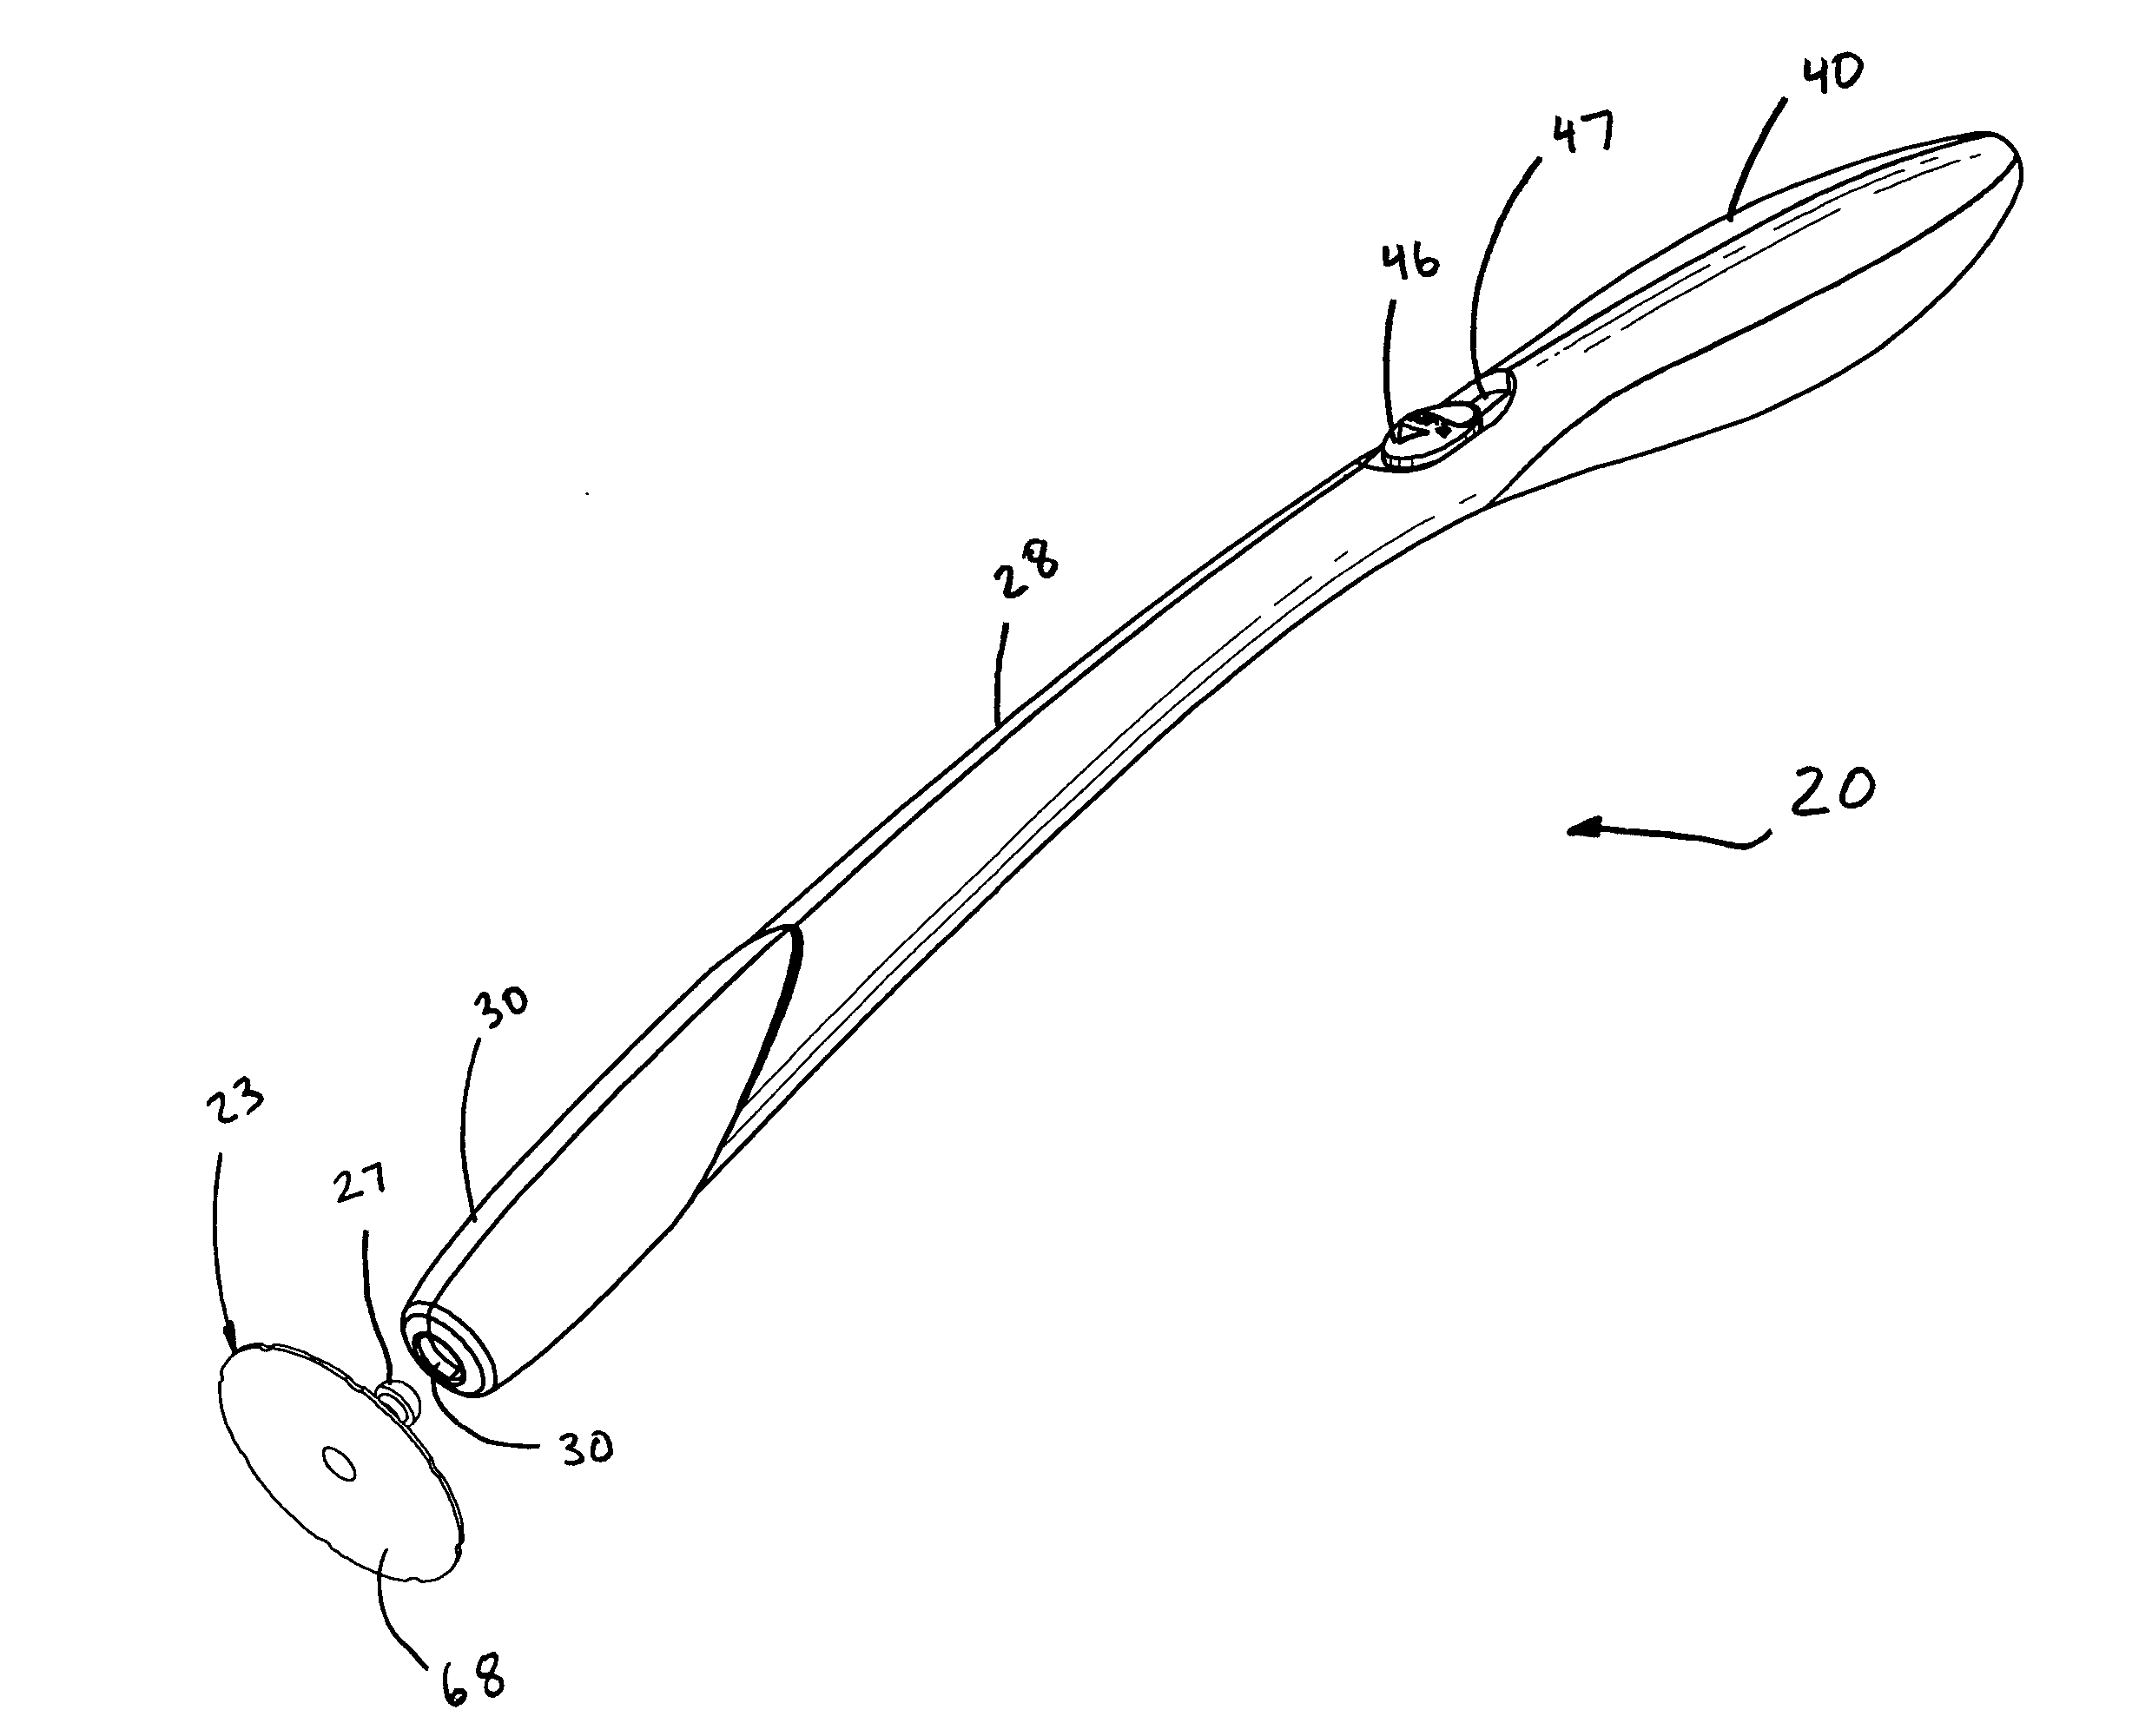 Cleaning tool assembly with a disposable cleaning implement